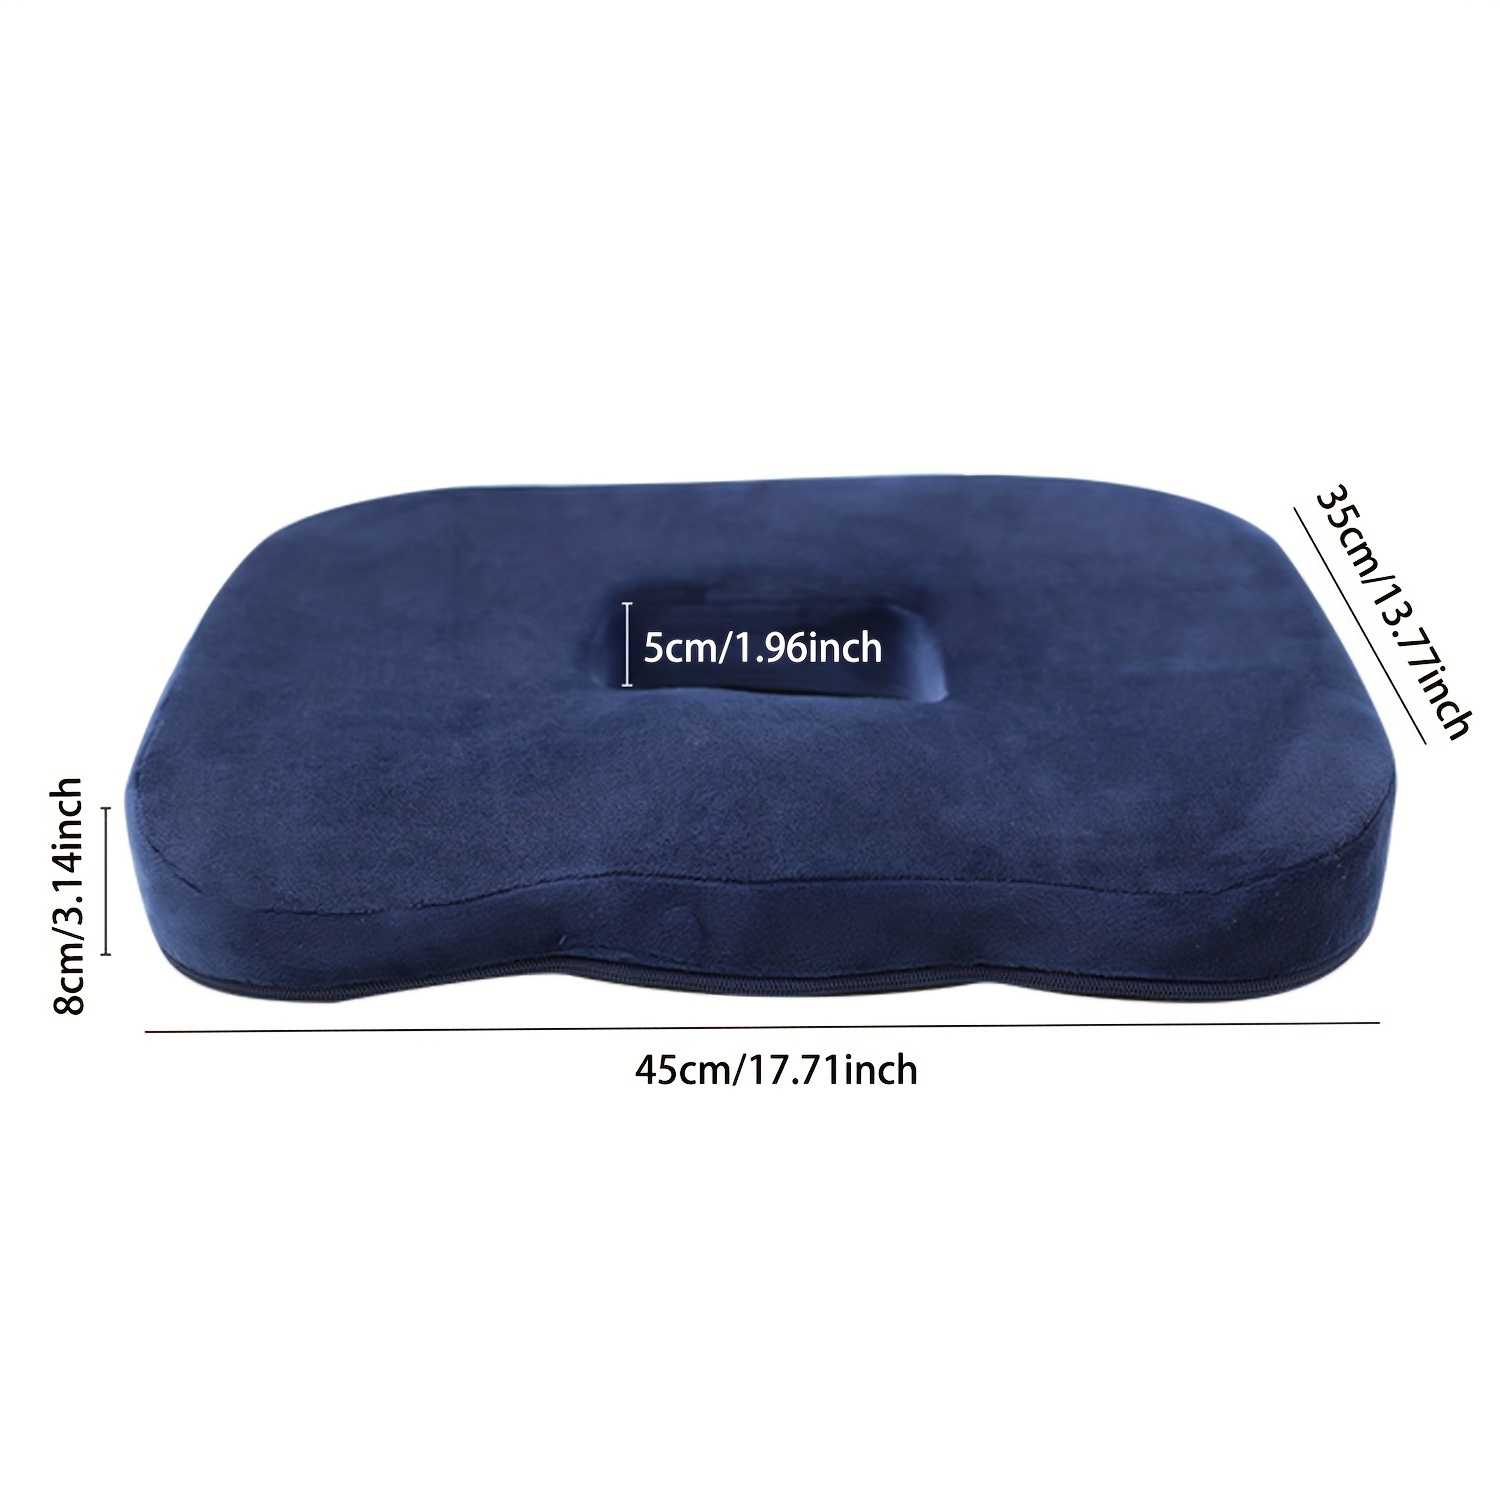 1pc Donut Pillow: Memory Foam Seat Cushion for Office Chair/Wheelchair -  Relieves Pressure & Pain from Postpartum, Prostate, Tailbone, Coccyx &  Sciati